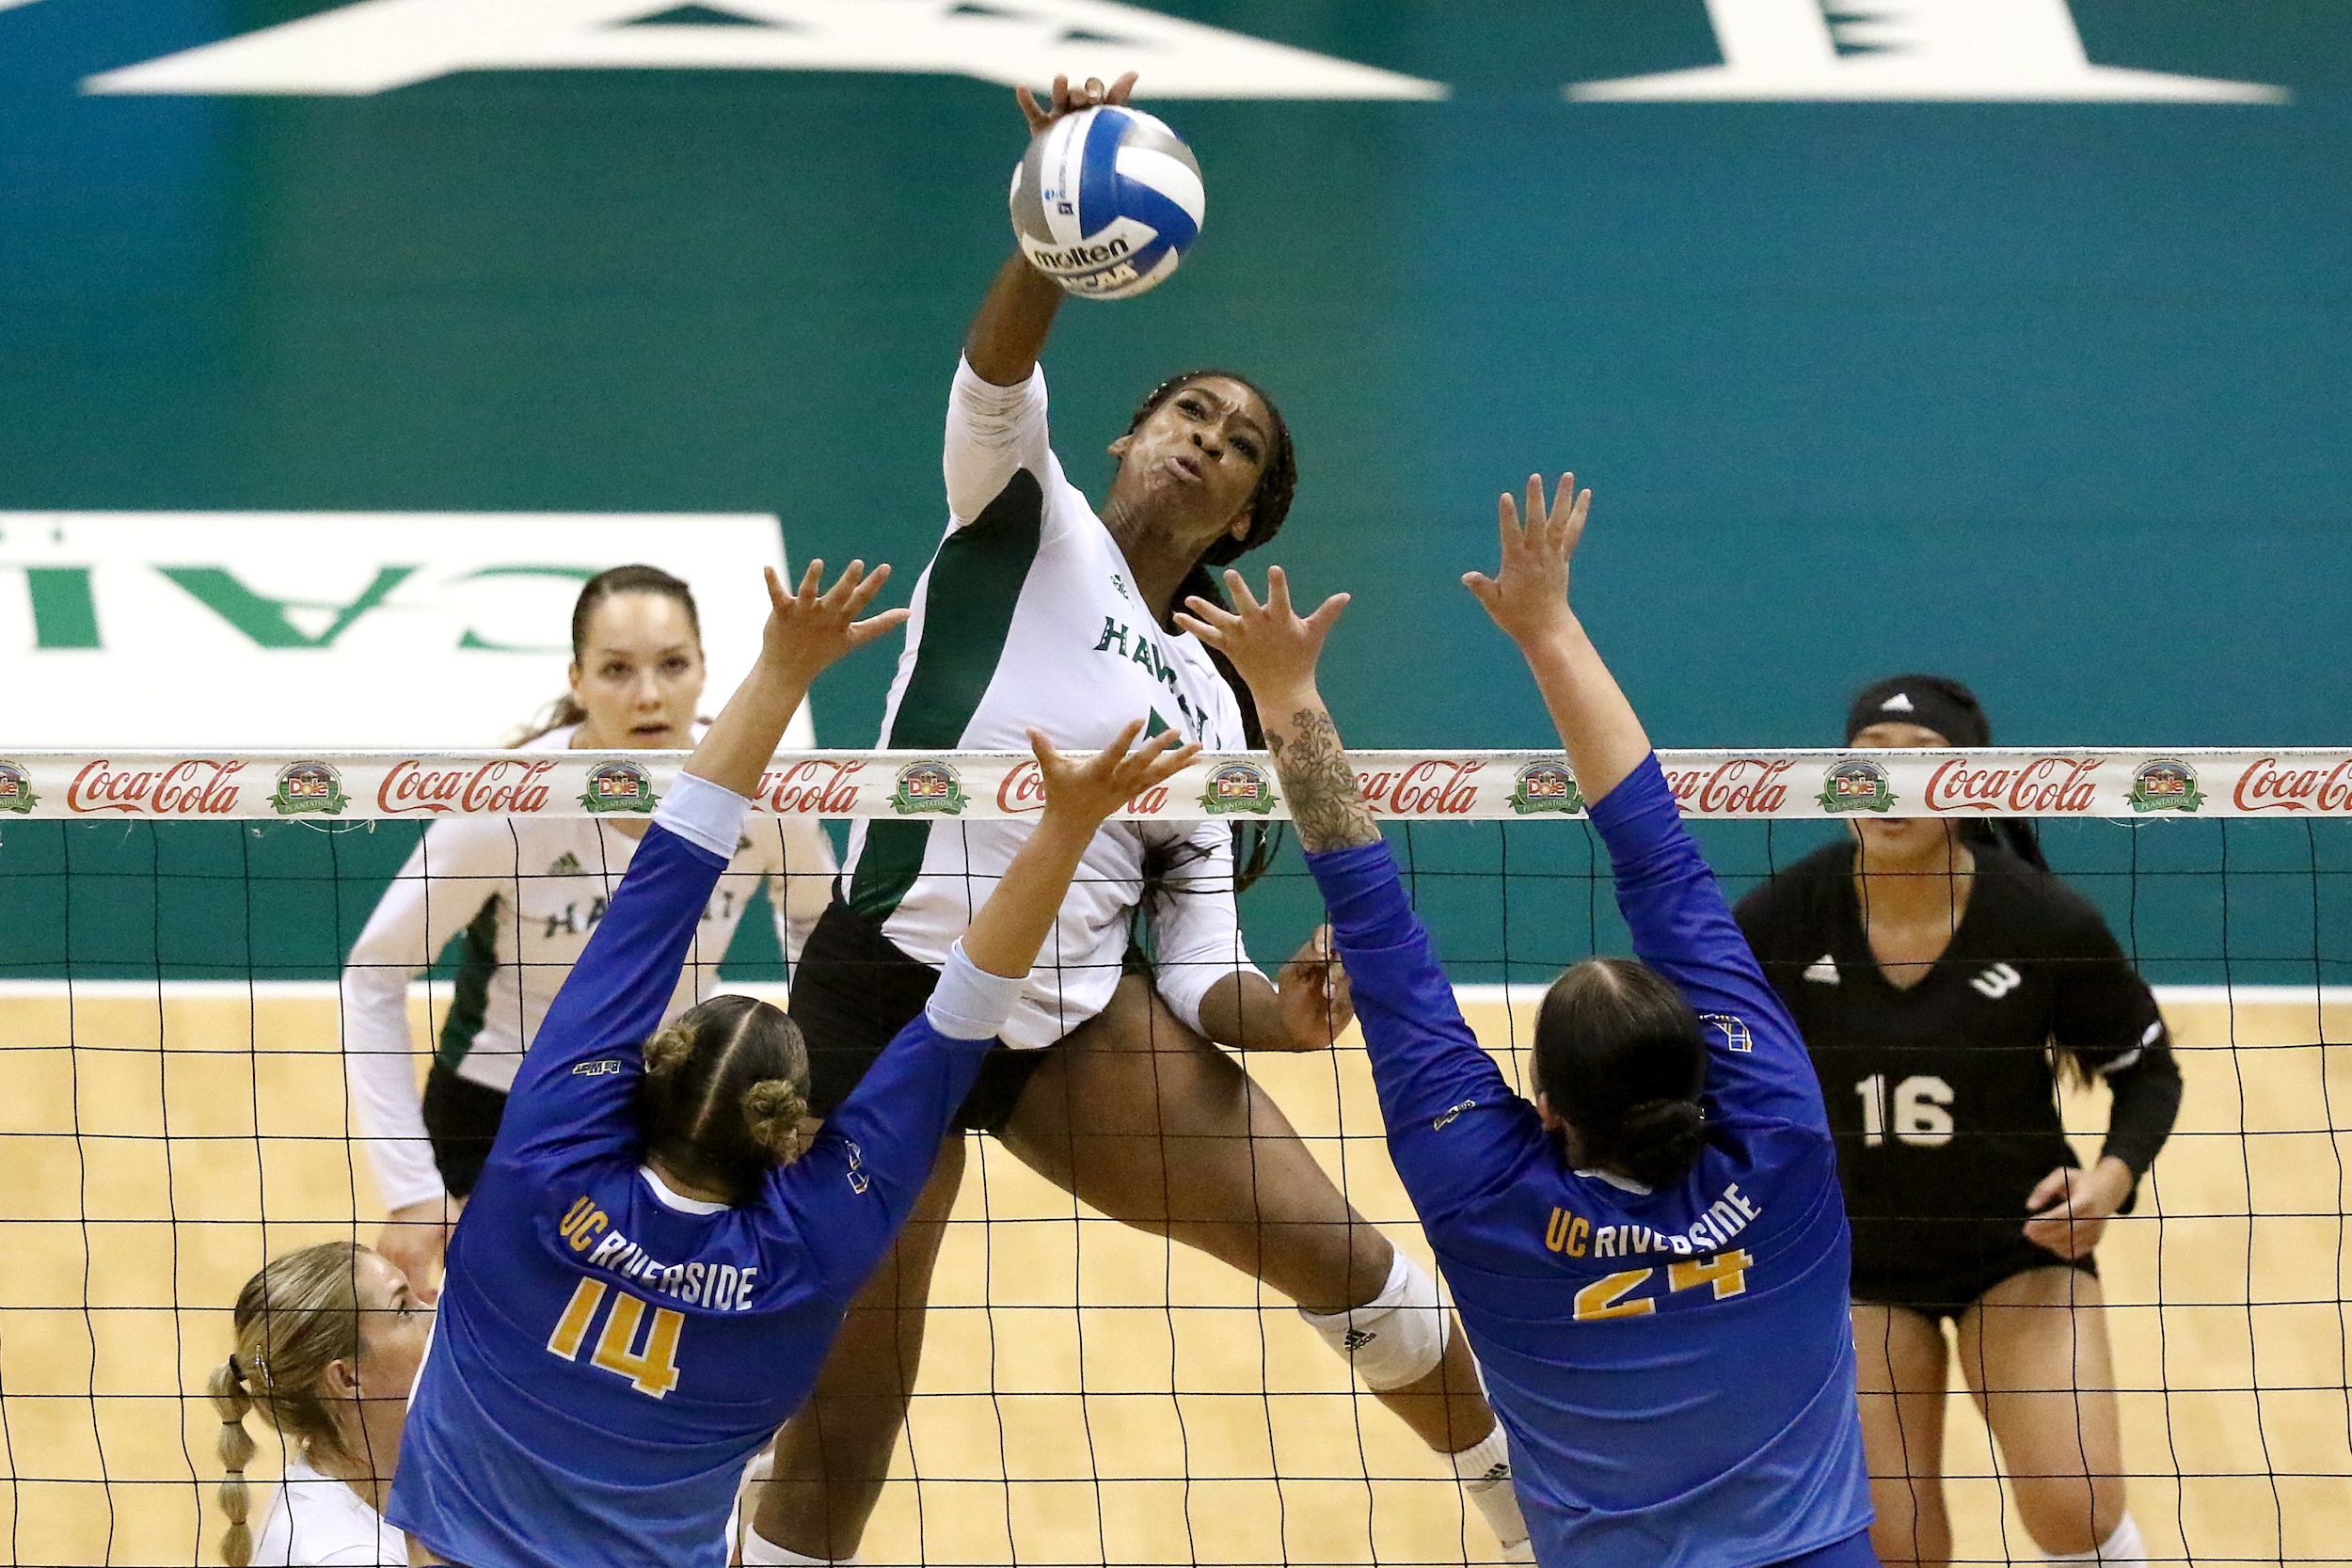 Read More - Rainbow Wahine roll into rematch with Long Beach State